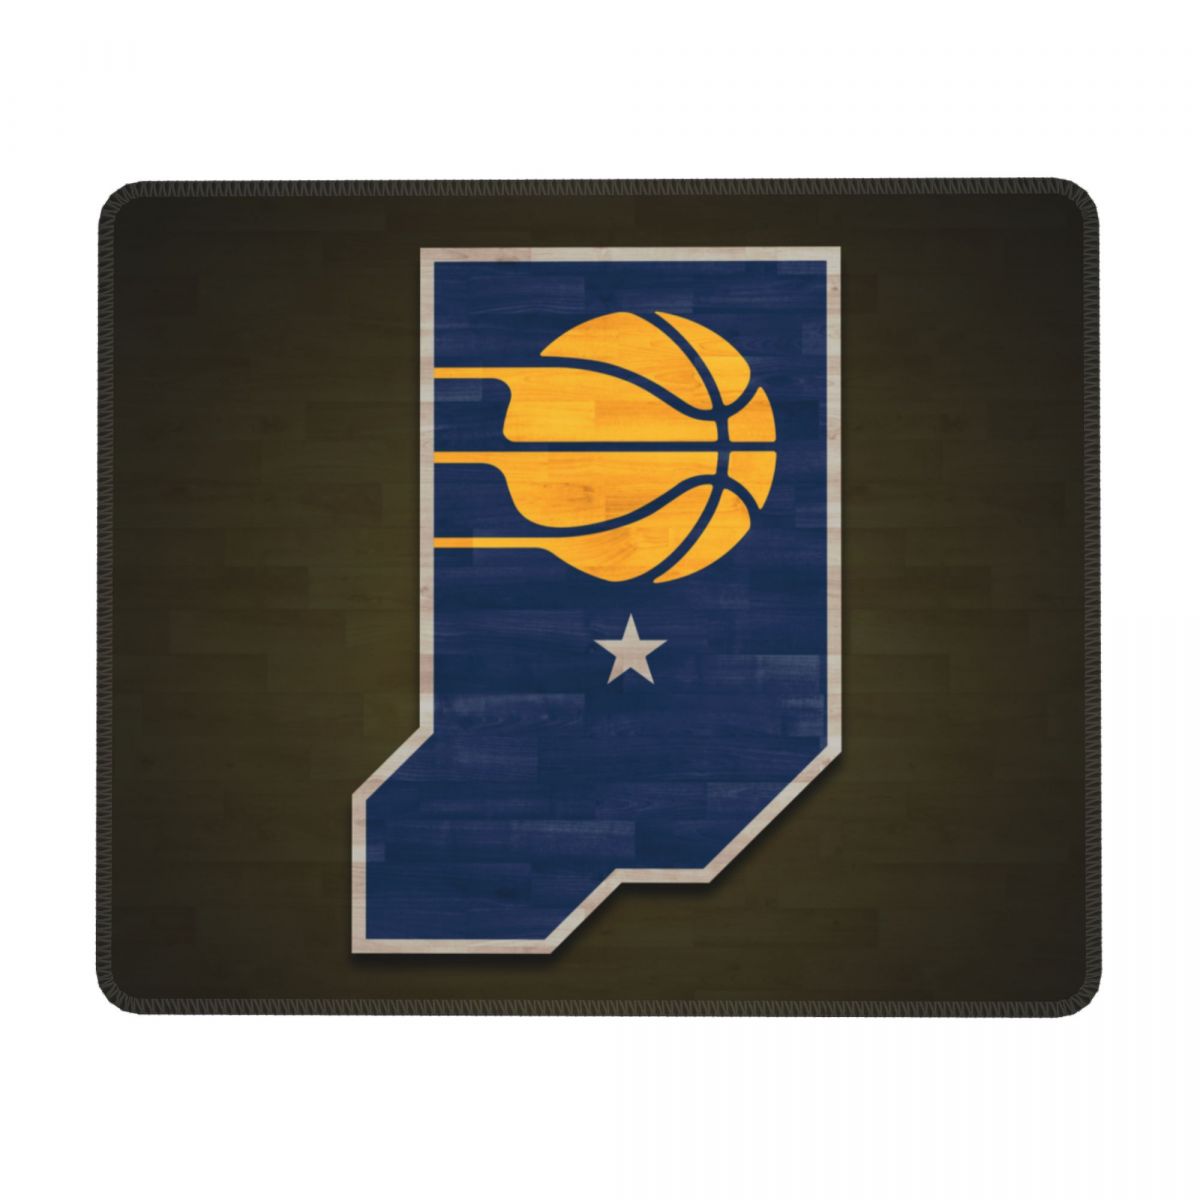 Indiana Pacers Alternate Logo Square Rubber Base MousePads